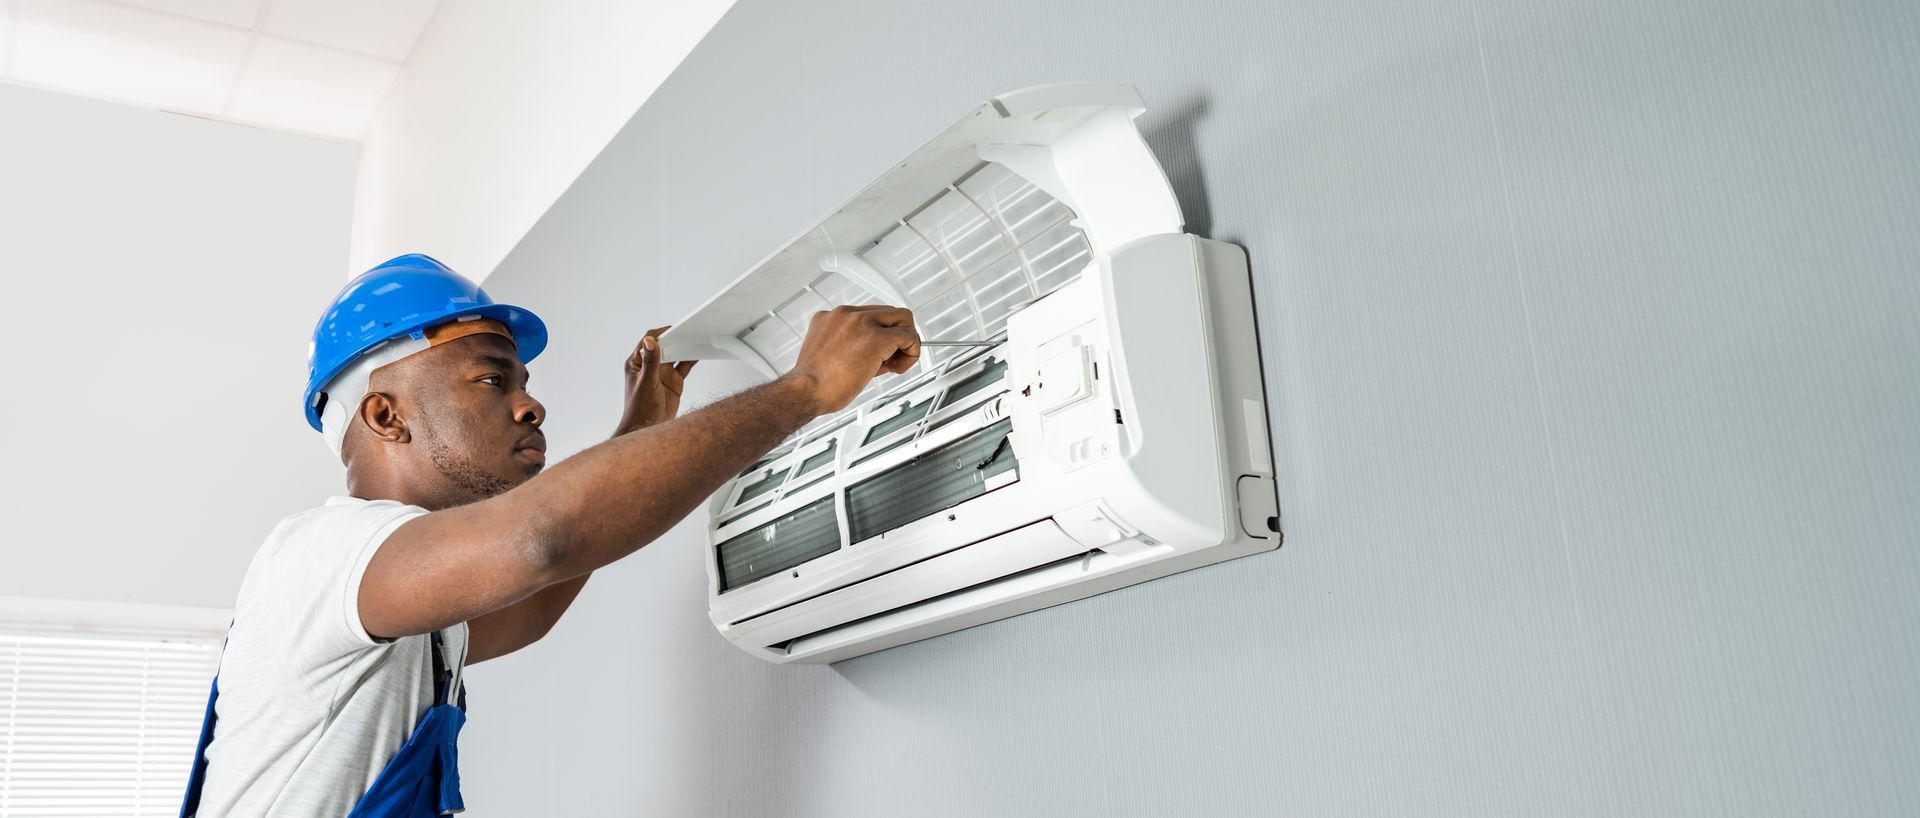 a man is installing an air conditioner on a wall .